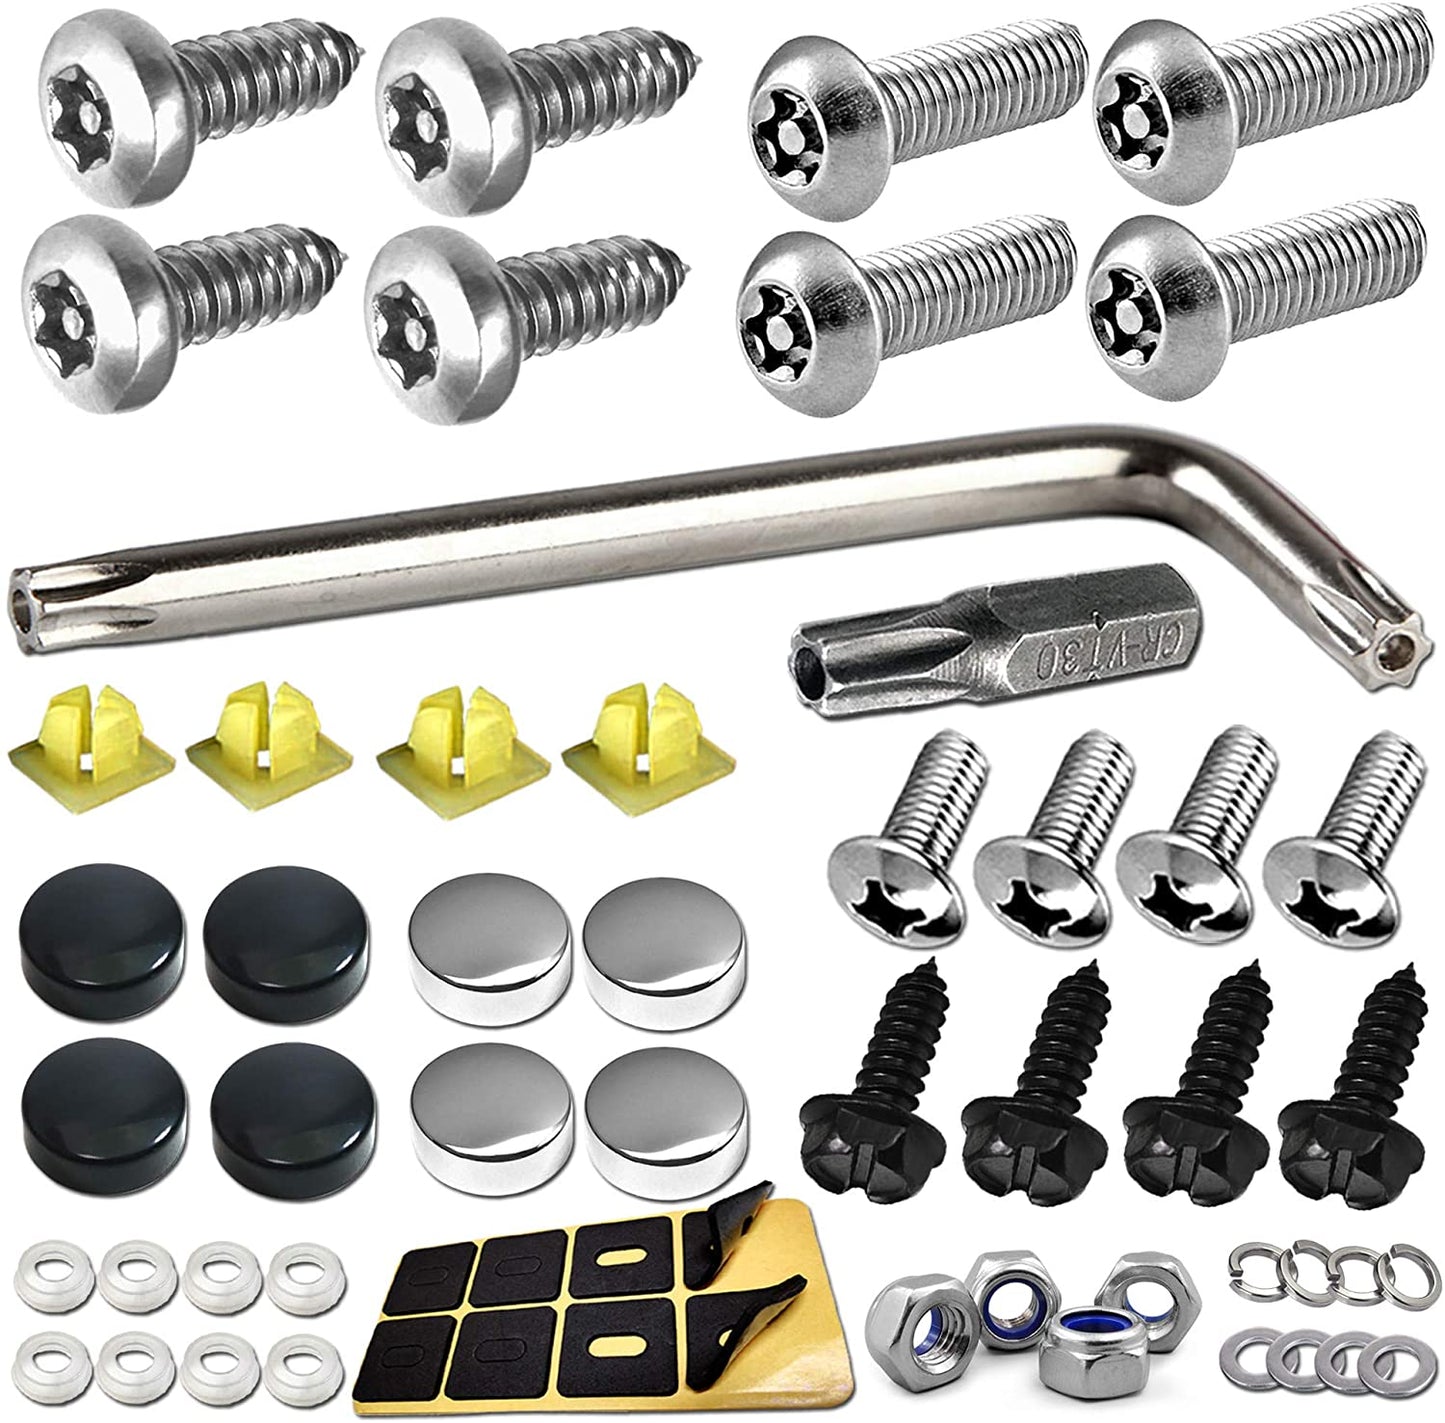 Aootf License Plate Screws Anti Theft - Stainless Steel Security Screws License Plate Bolts Fasteners,Tamper Proof Protection for License Plates on Cars Trucks, Black Chrome Caps -58PC Ultimate Set - (For 8 piece(s))